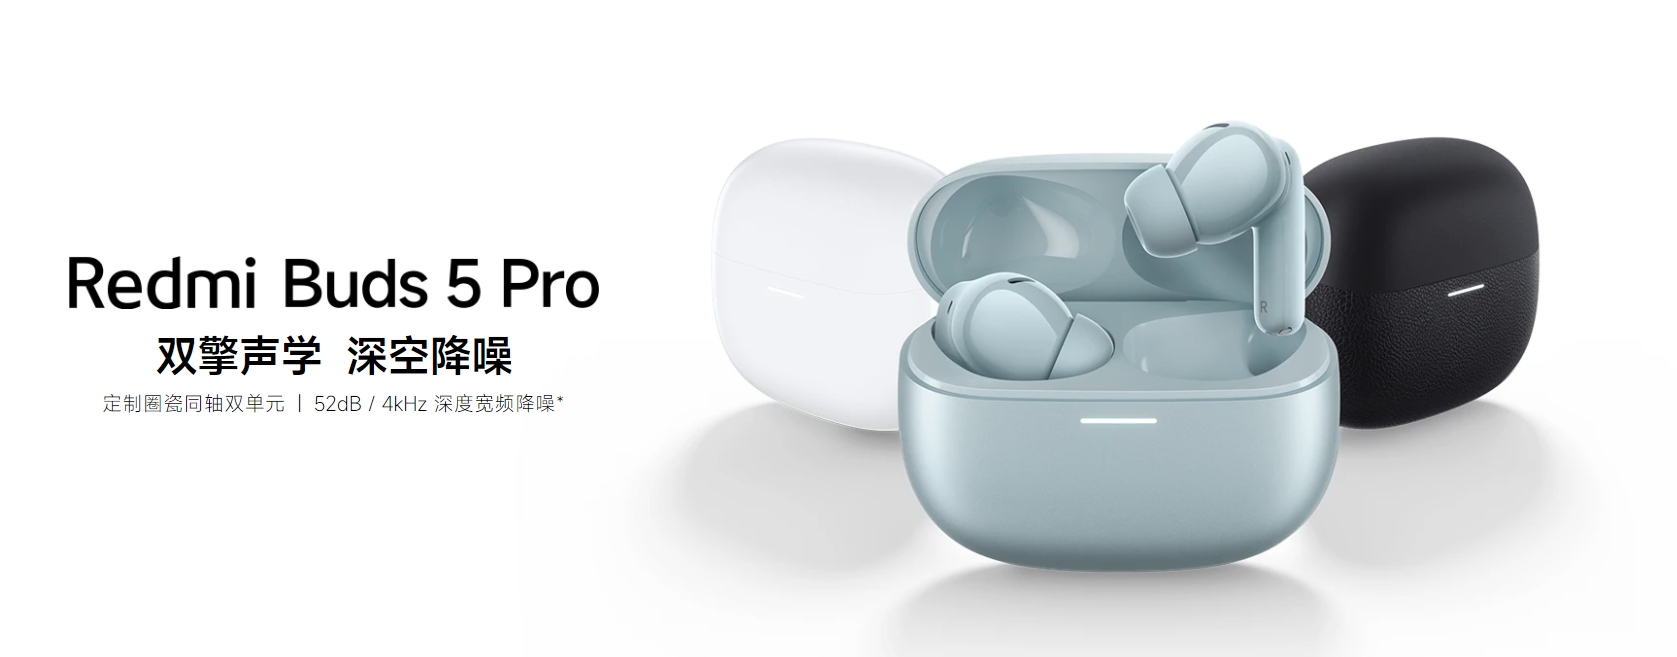 Xiaomi listed Redmi Buds 5 Pro earbuds for 399 yuan ($56) ahead of its  Redmi event - Gizmochina